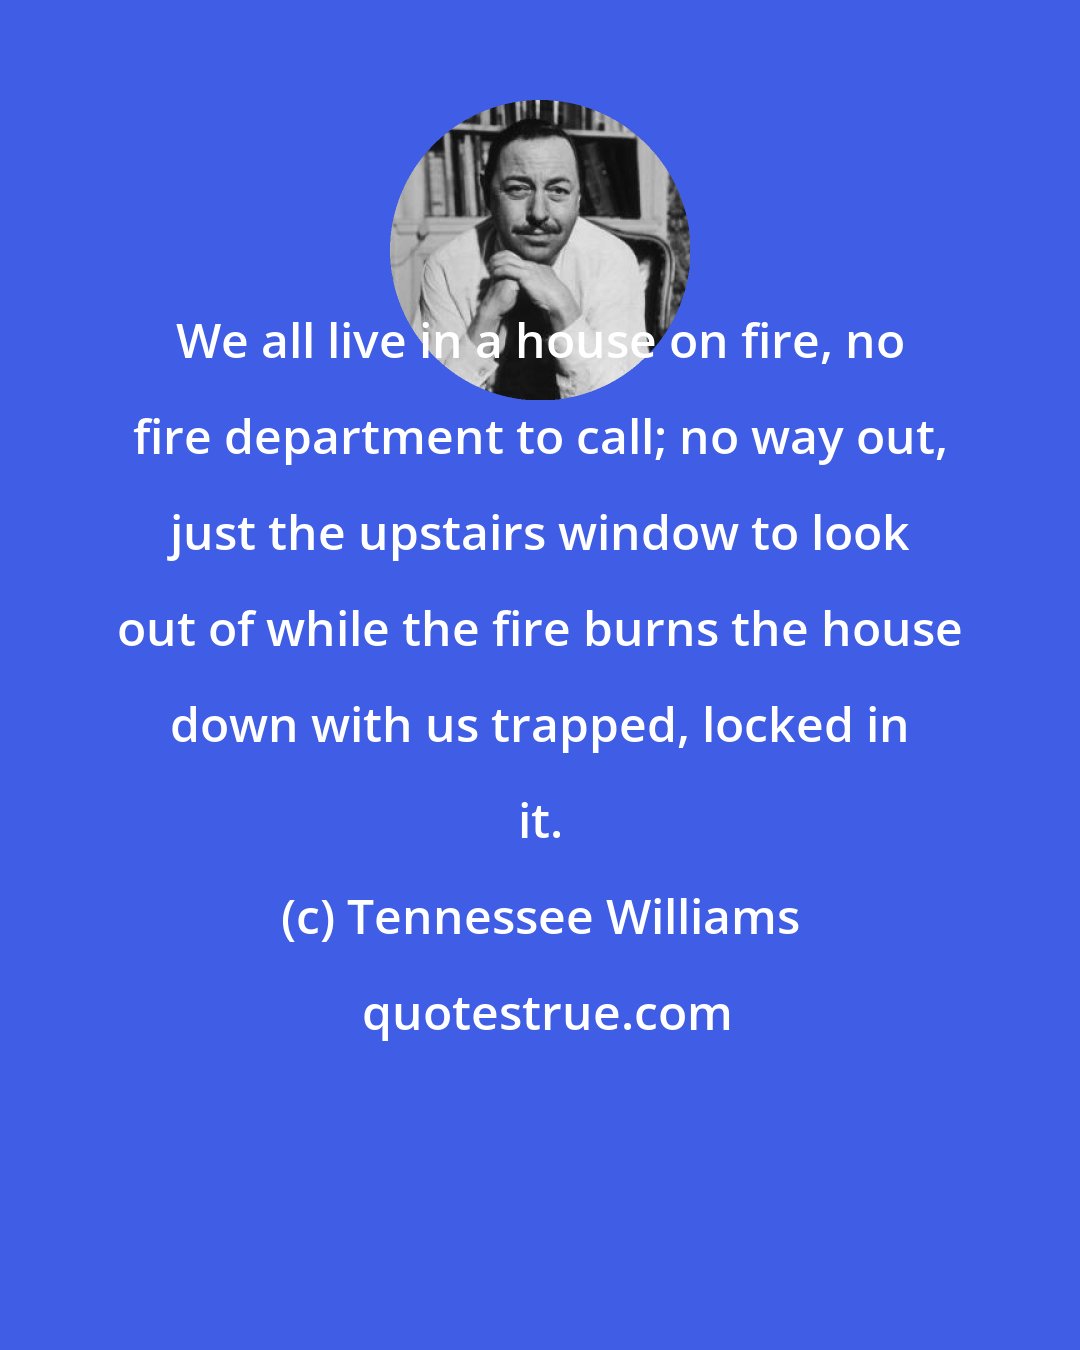 Tennessee Williams: We all live in a house on fire, no fire department to call; no way out, just the upstairs window to look out of while the fire burns the house down with us trapped, locked in it.